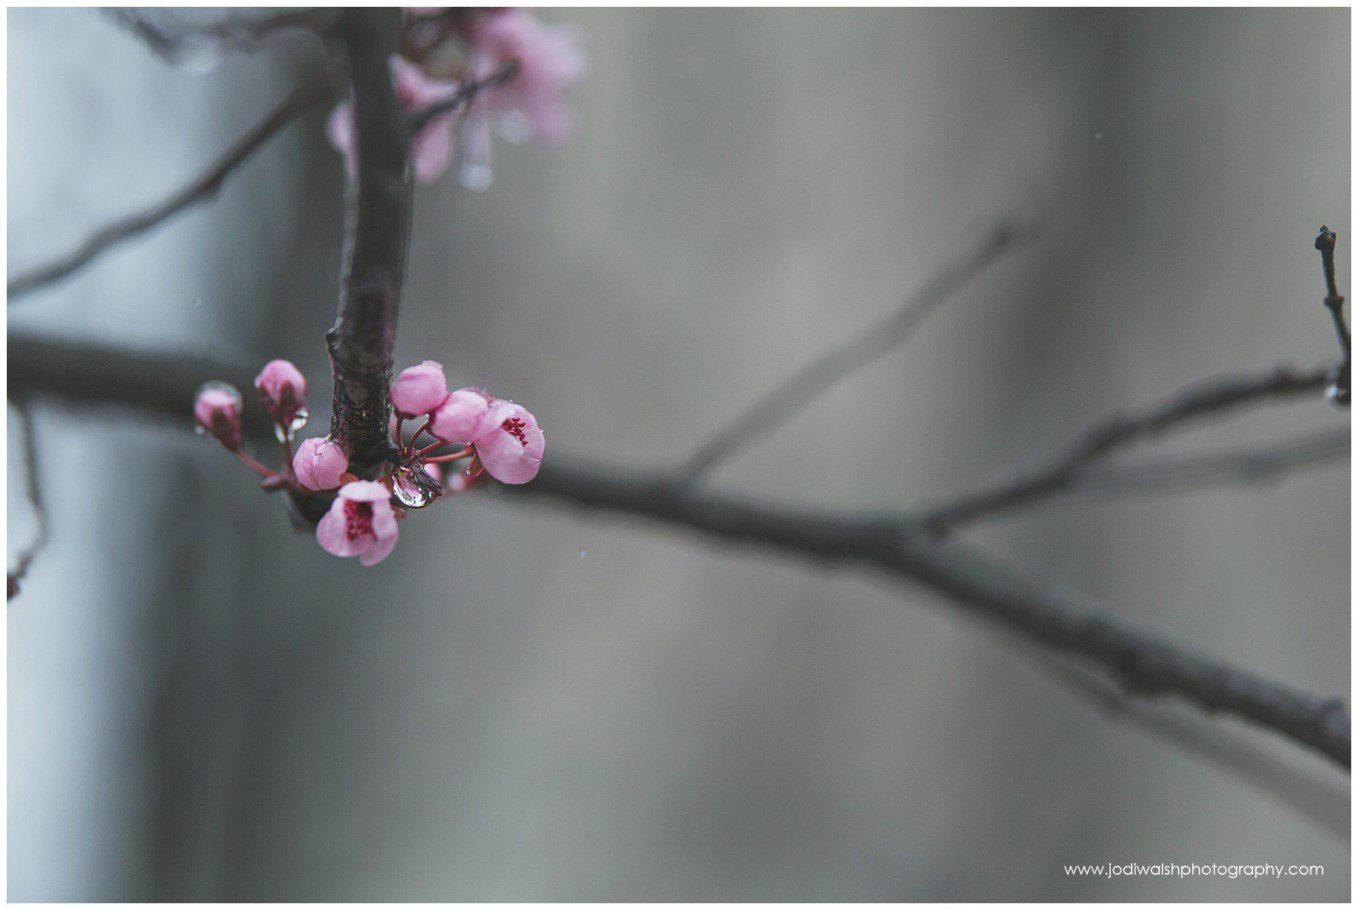 image of a crab apple blossom buds on a branch.